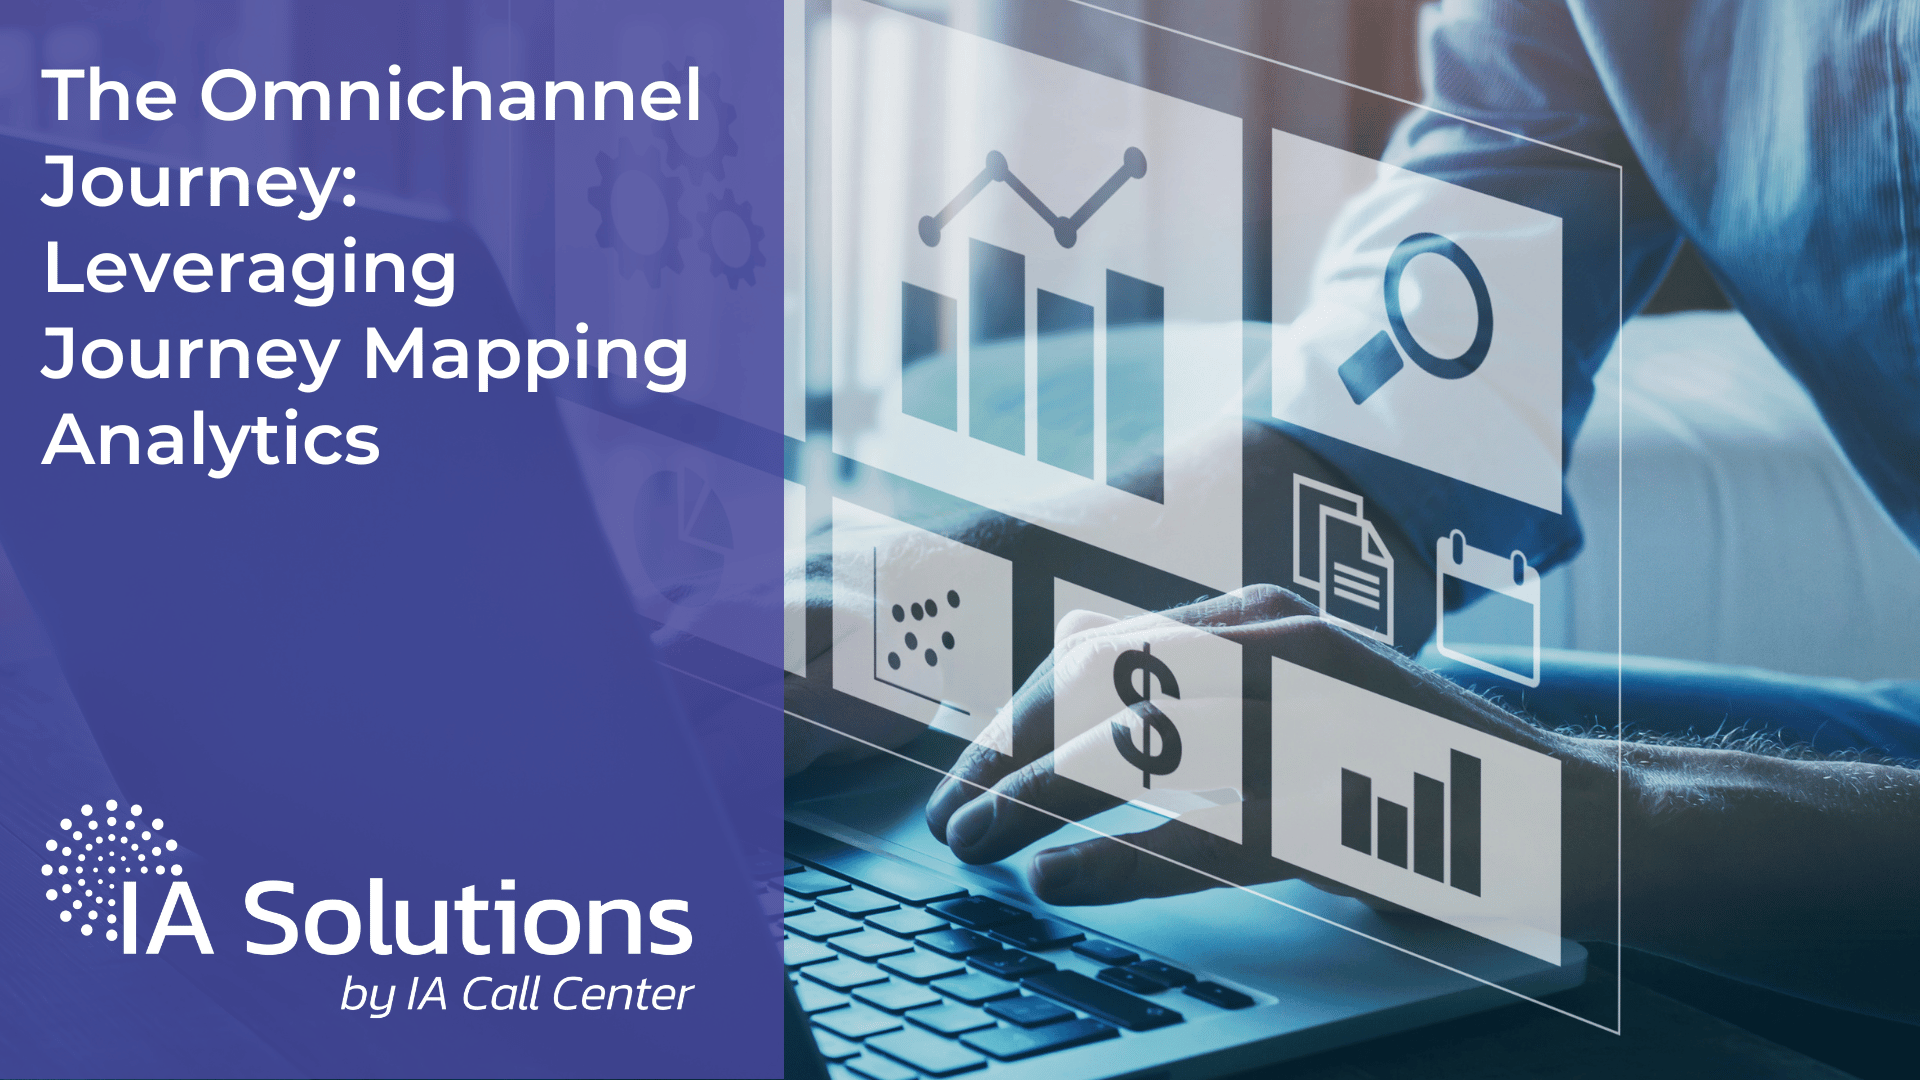 The Omnichannel Journey Leveraging Journey Mapping Analytics Featured Image